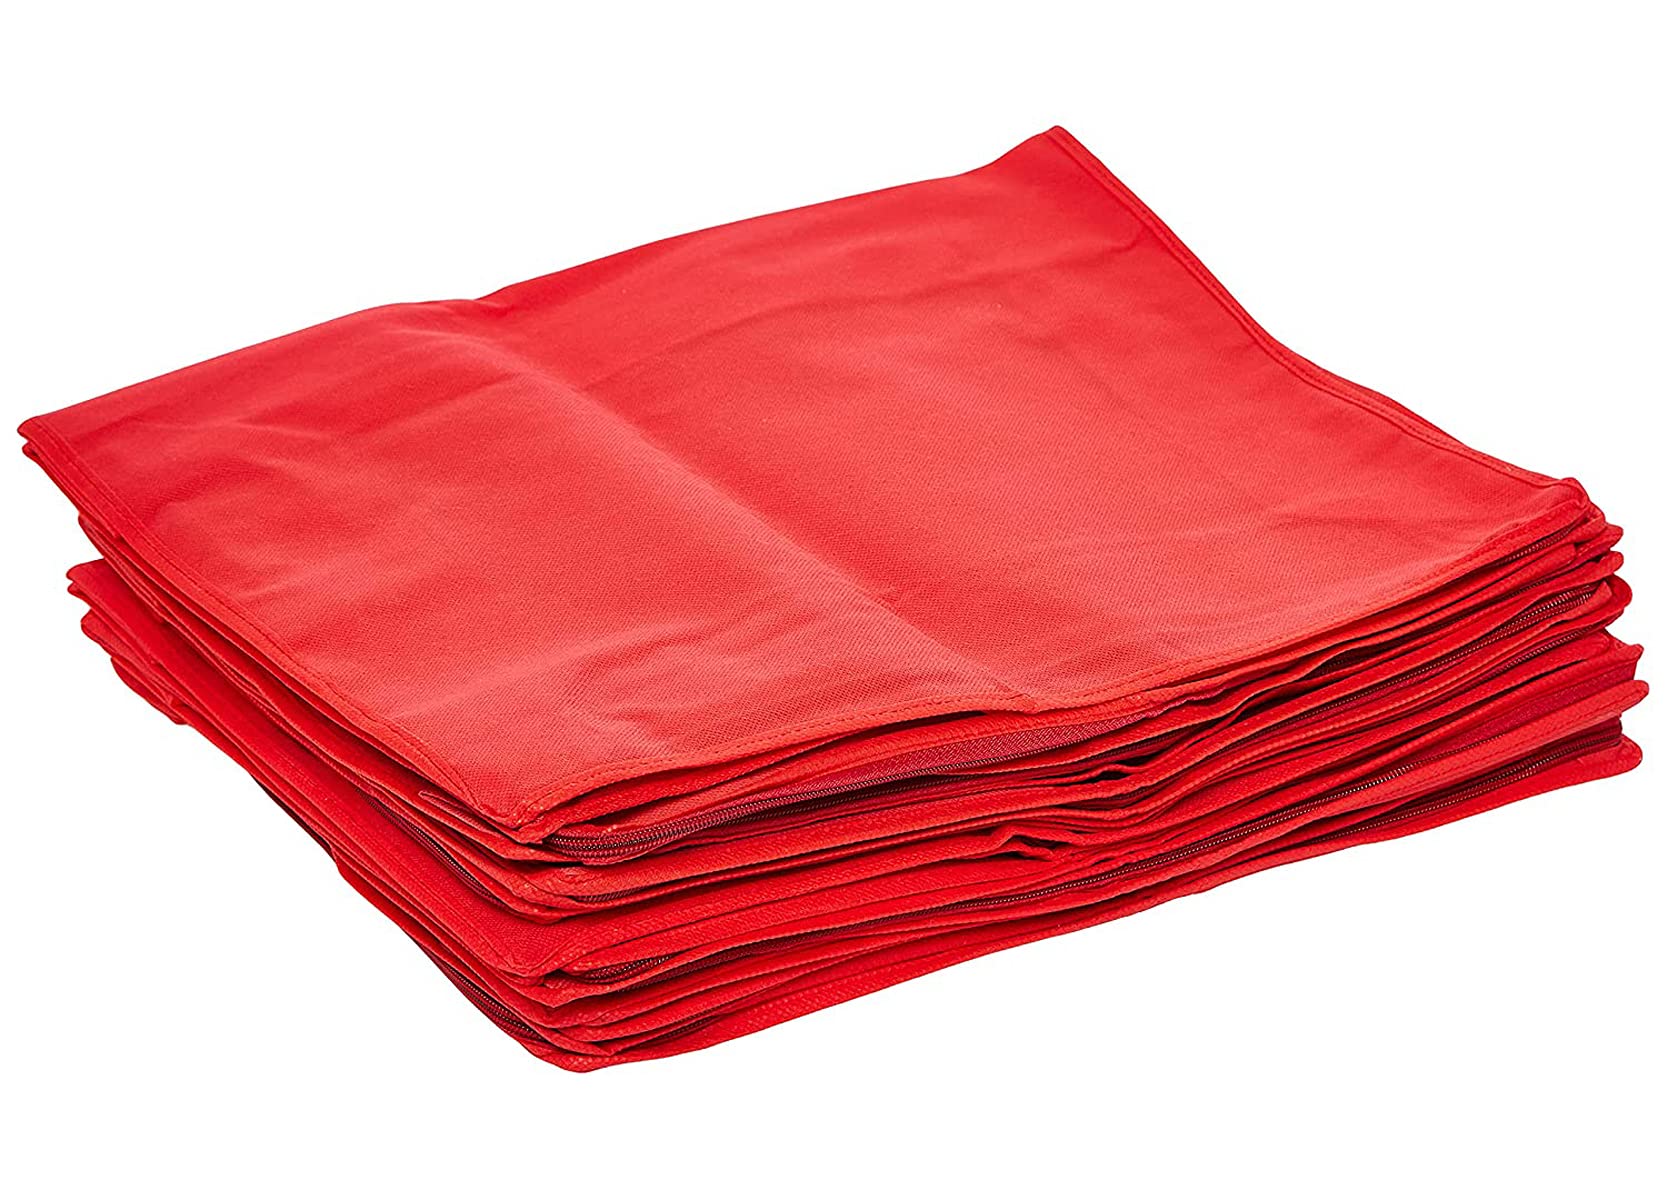 Kuber Industries Non Woven Saree Covers With Zip|Saree Covers For Storage|Saree Packing Covers For Wedding|Pack Of 12 Piece (Red)